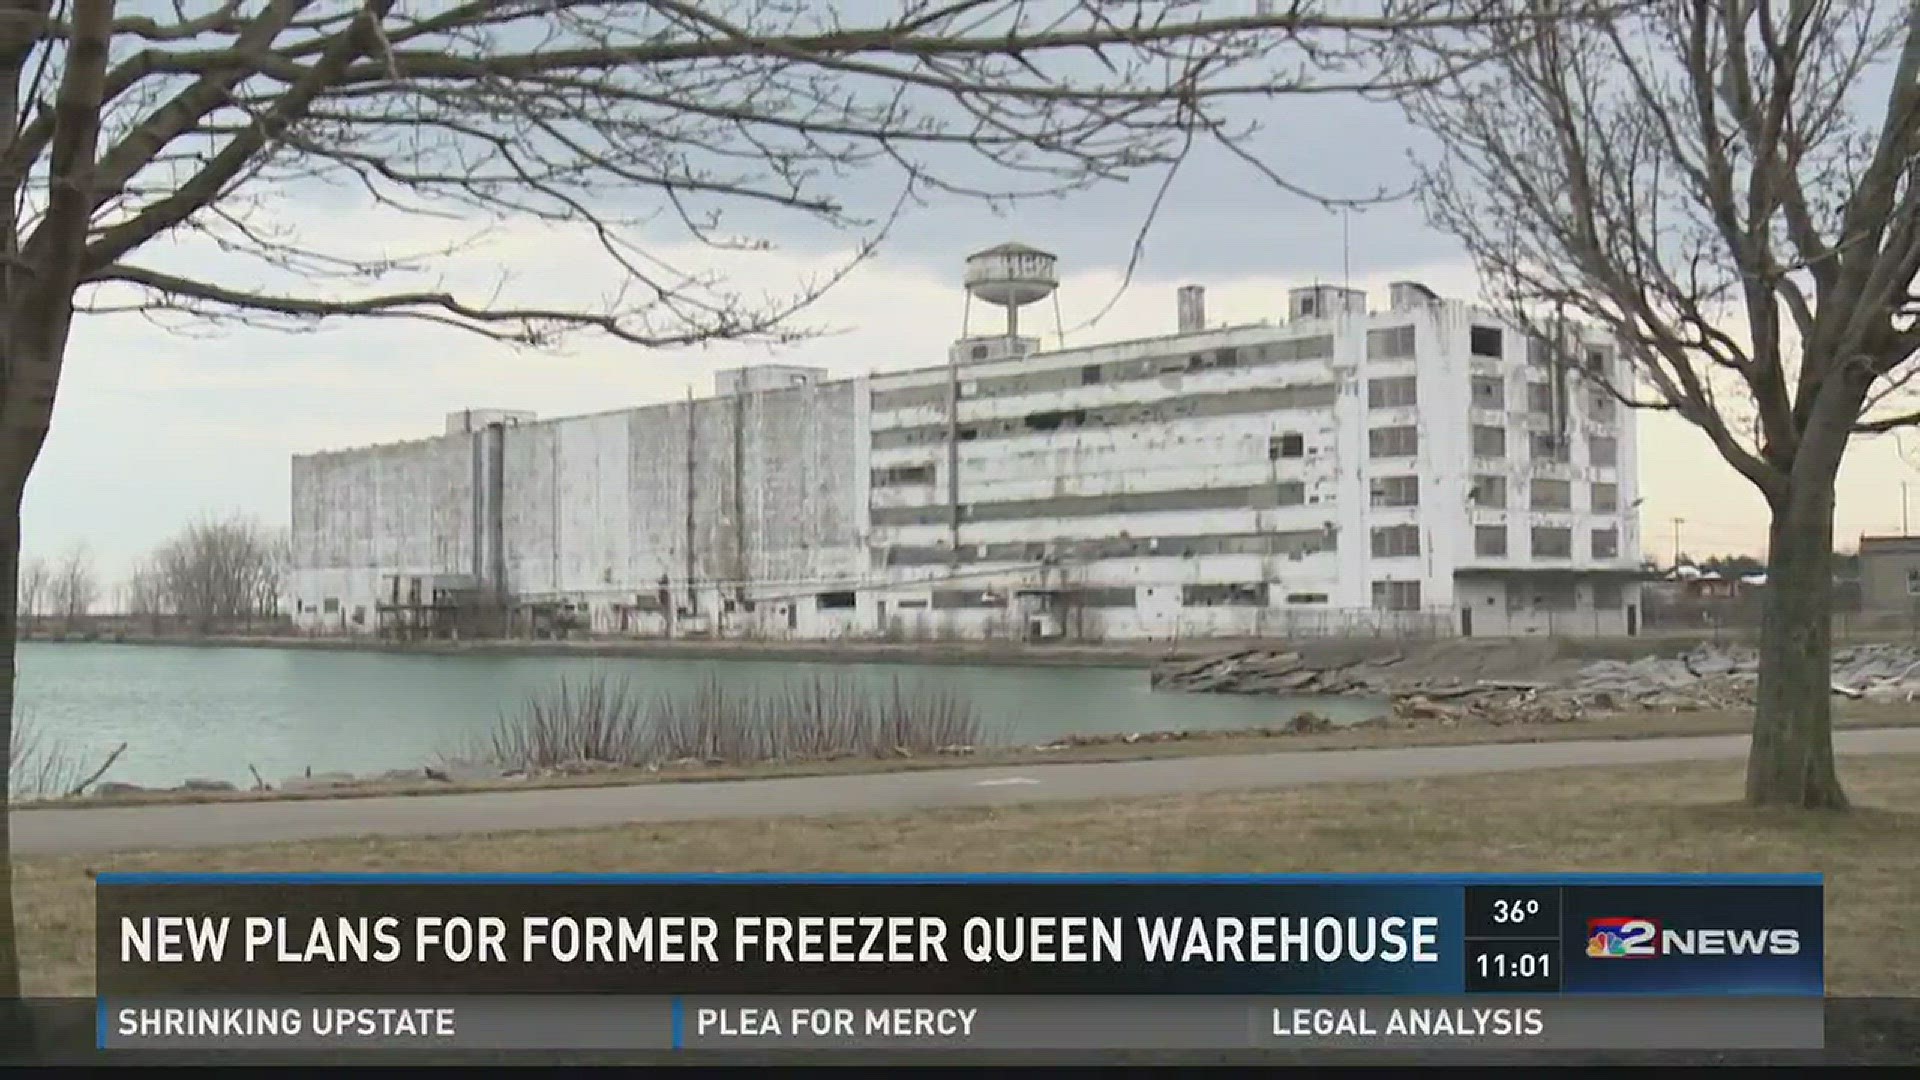 New Plans For Former Freezer Queen Warehouse